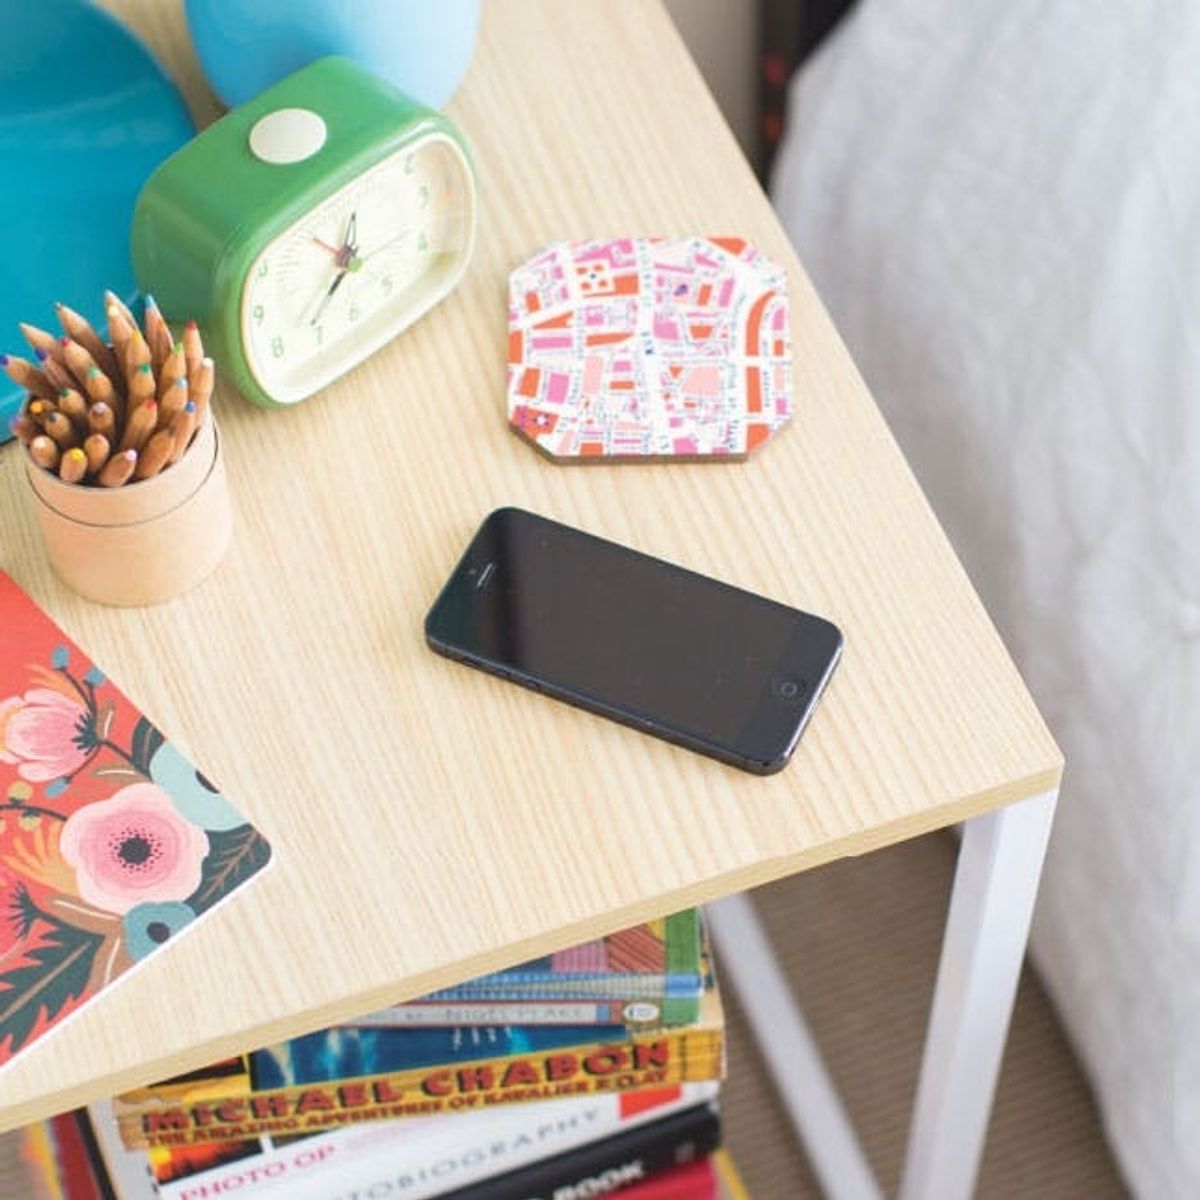 How to Make a Nightstand That Charges Your Phone